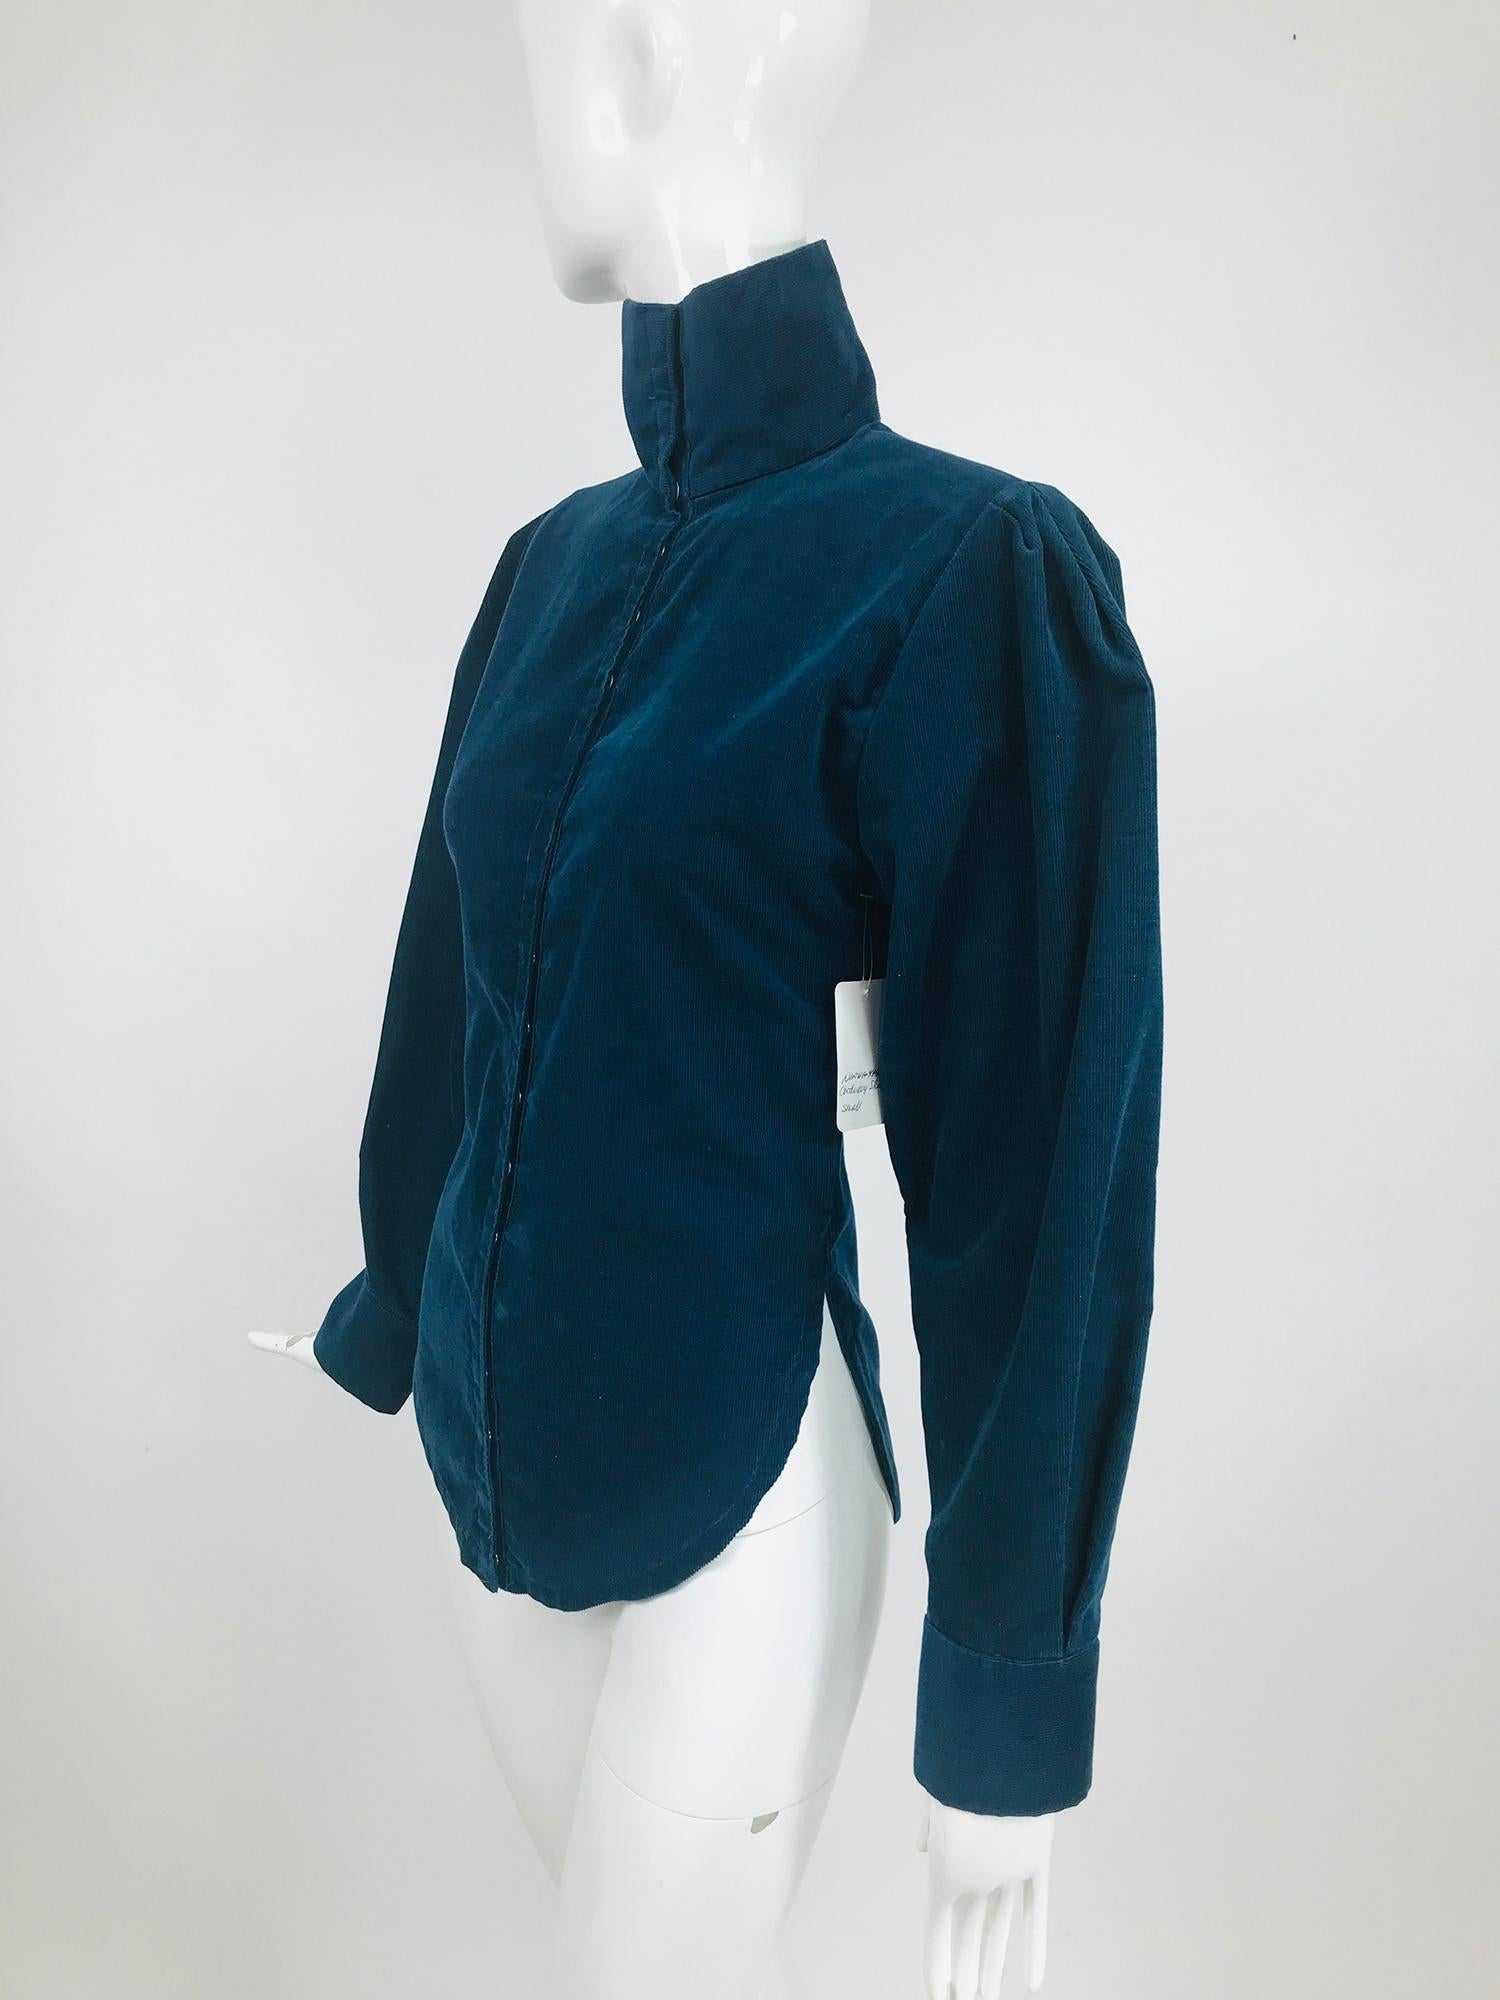 Vintage Norma Kamali Teal Blue Corduroy High Neck Fitted Shirt 1980s 5